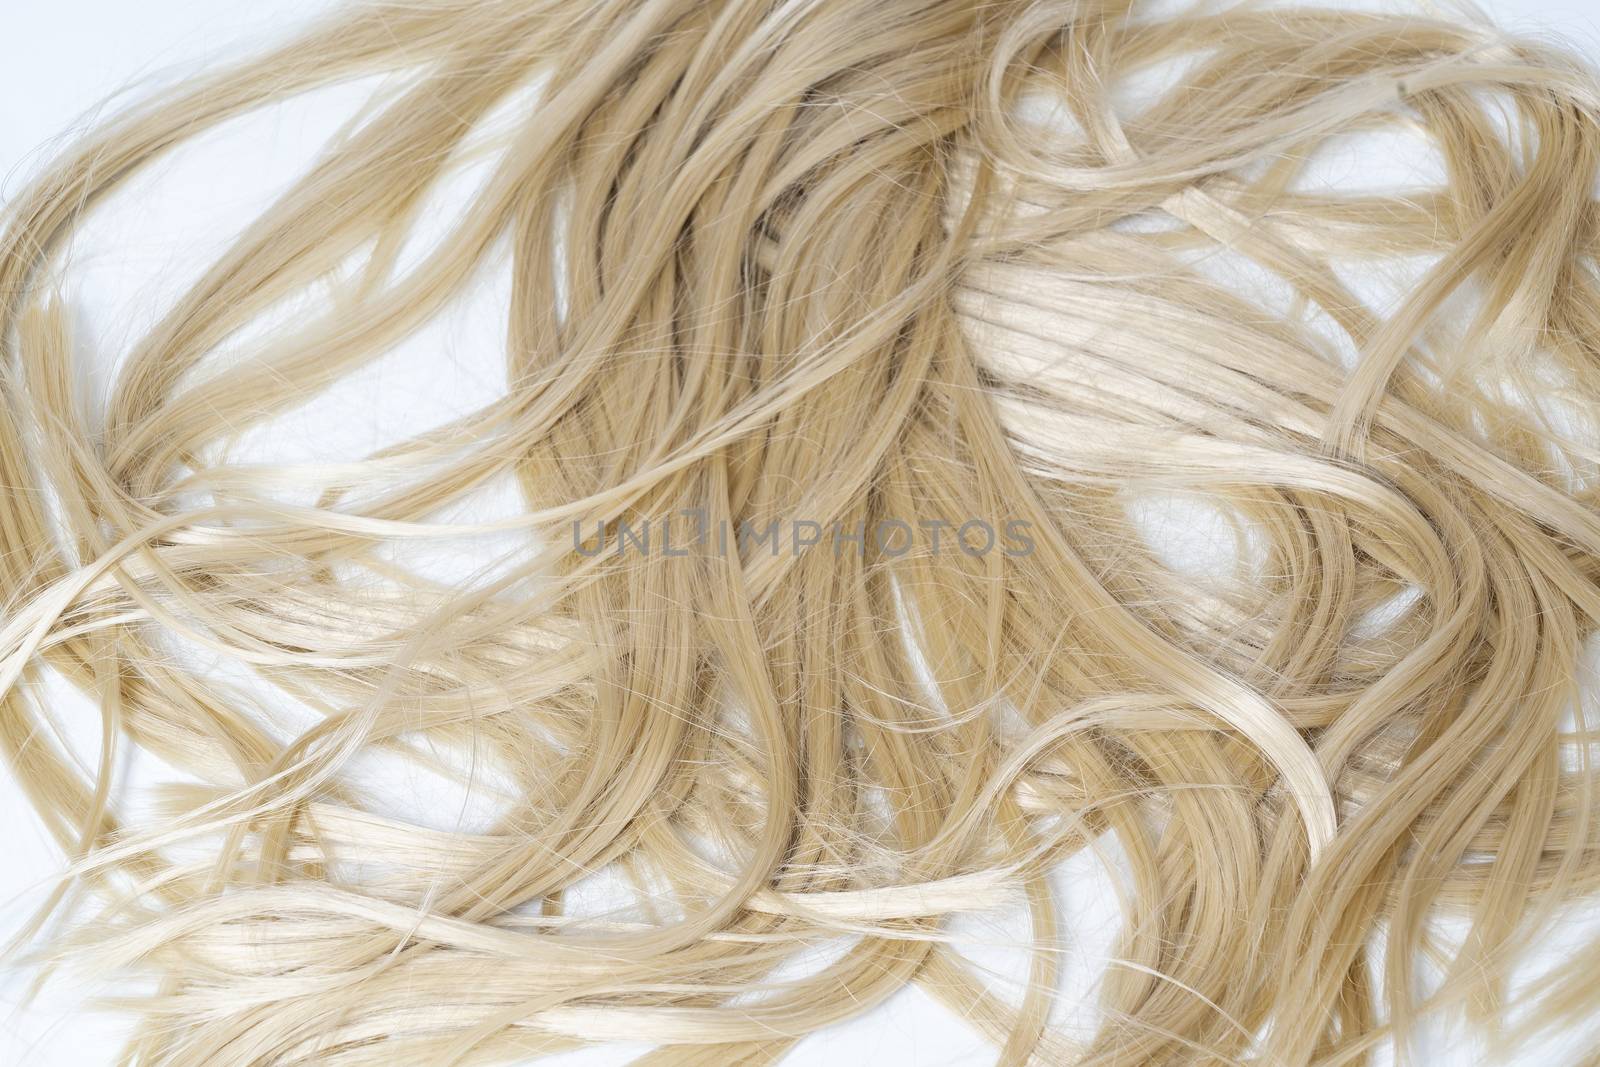 long blonde hair lying on a white surface